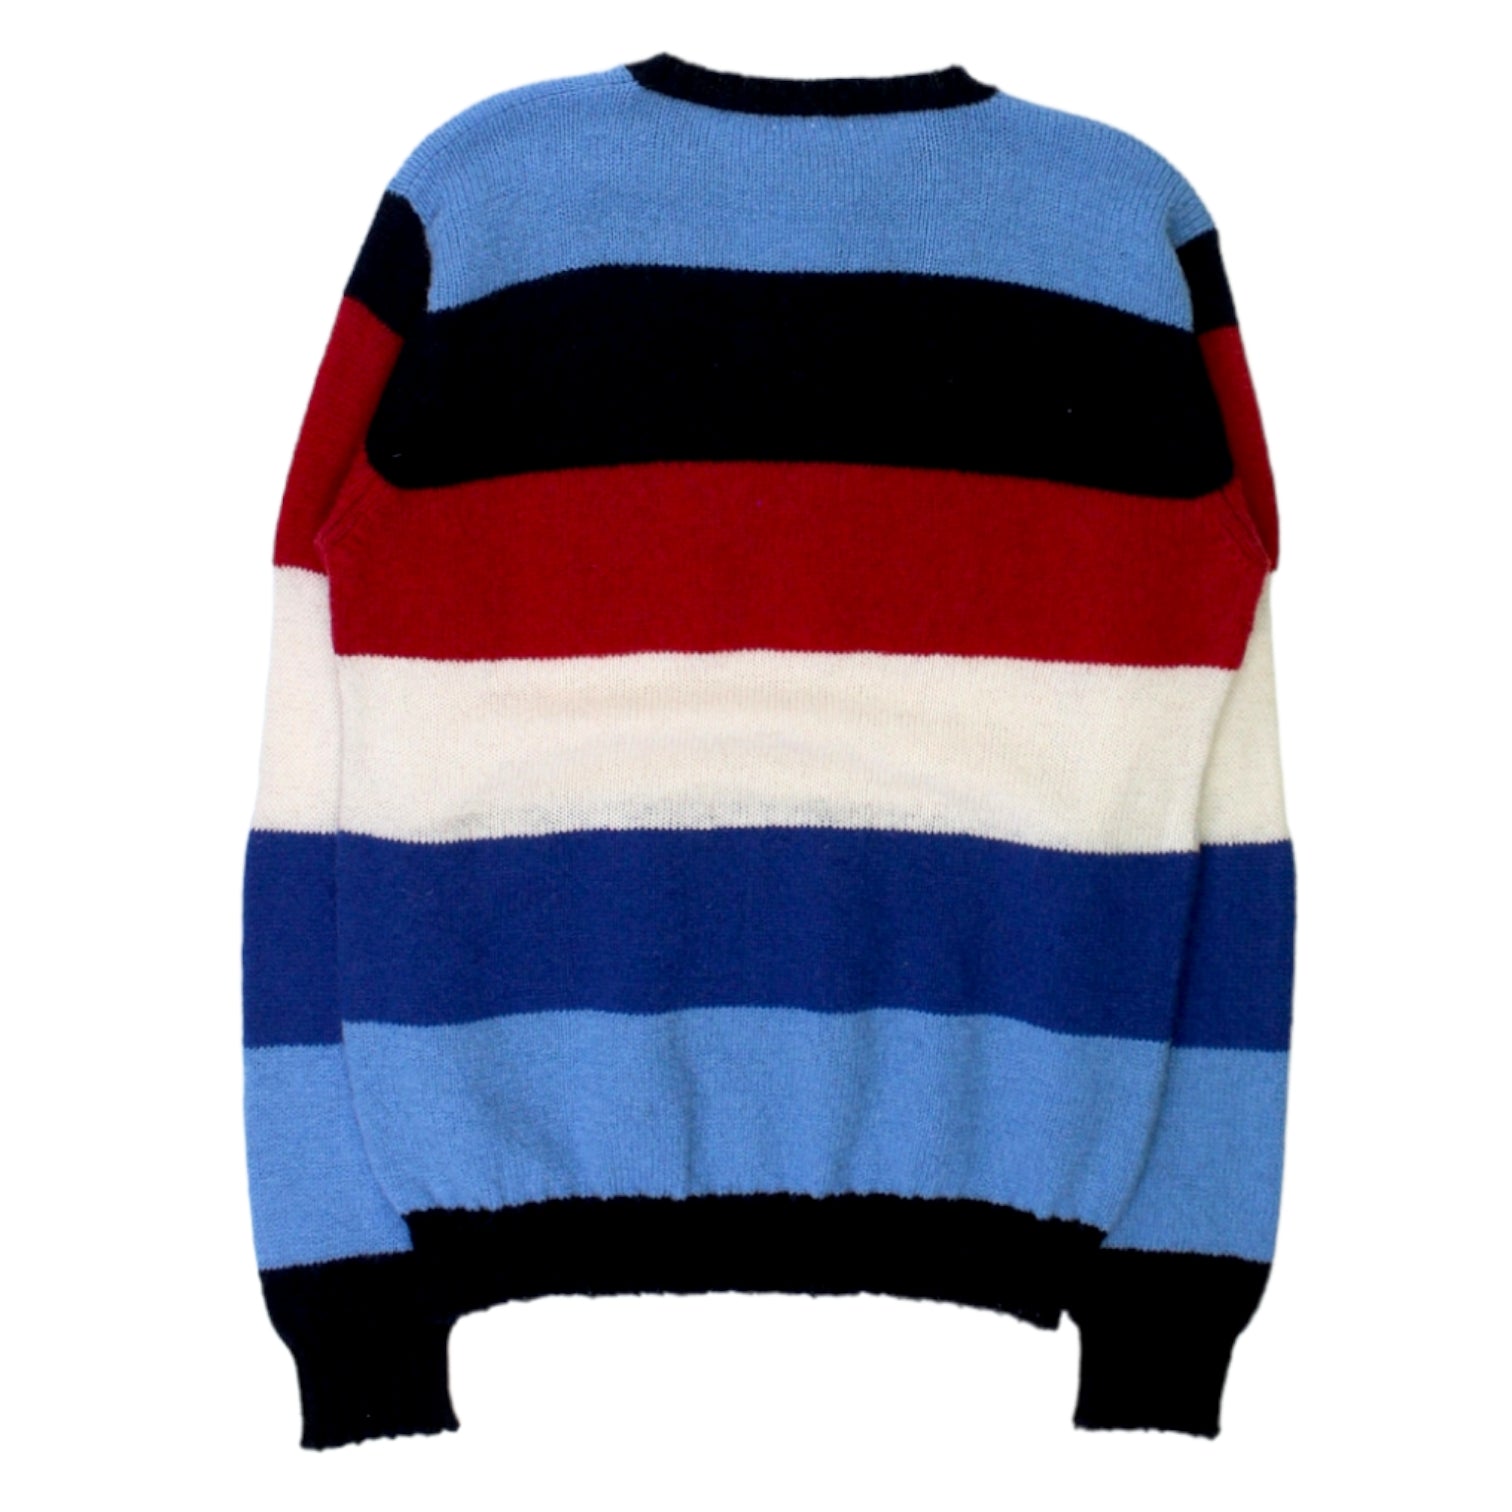 Jamieson's Blue / Multi Knitted Jumper